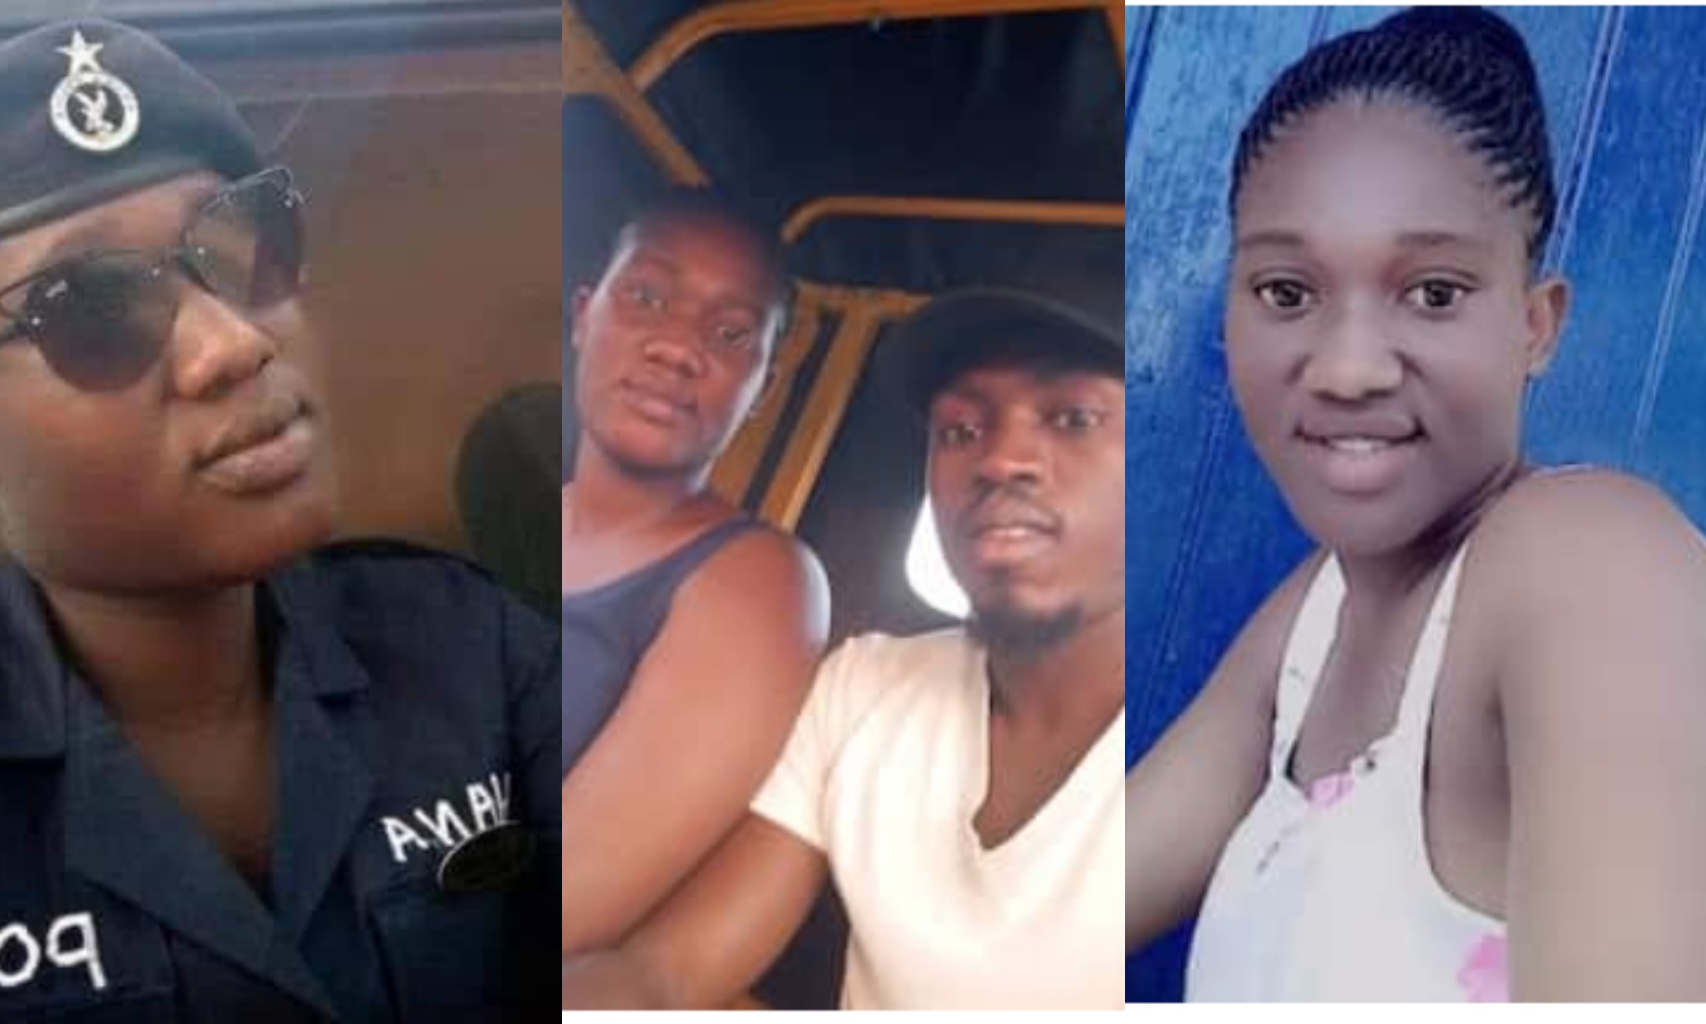 “WE LIVE AND DIE TOGETHER” – Alleged Killer And Boyfriend Of Slain ...